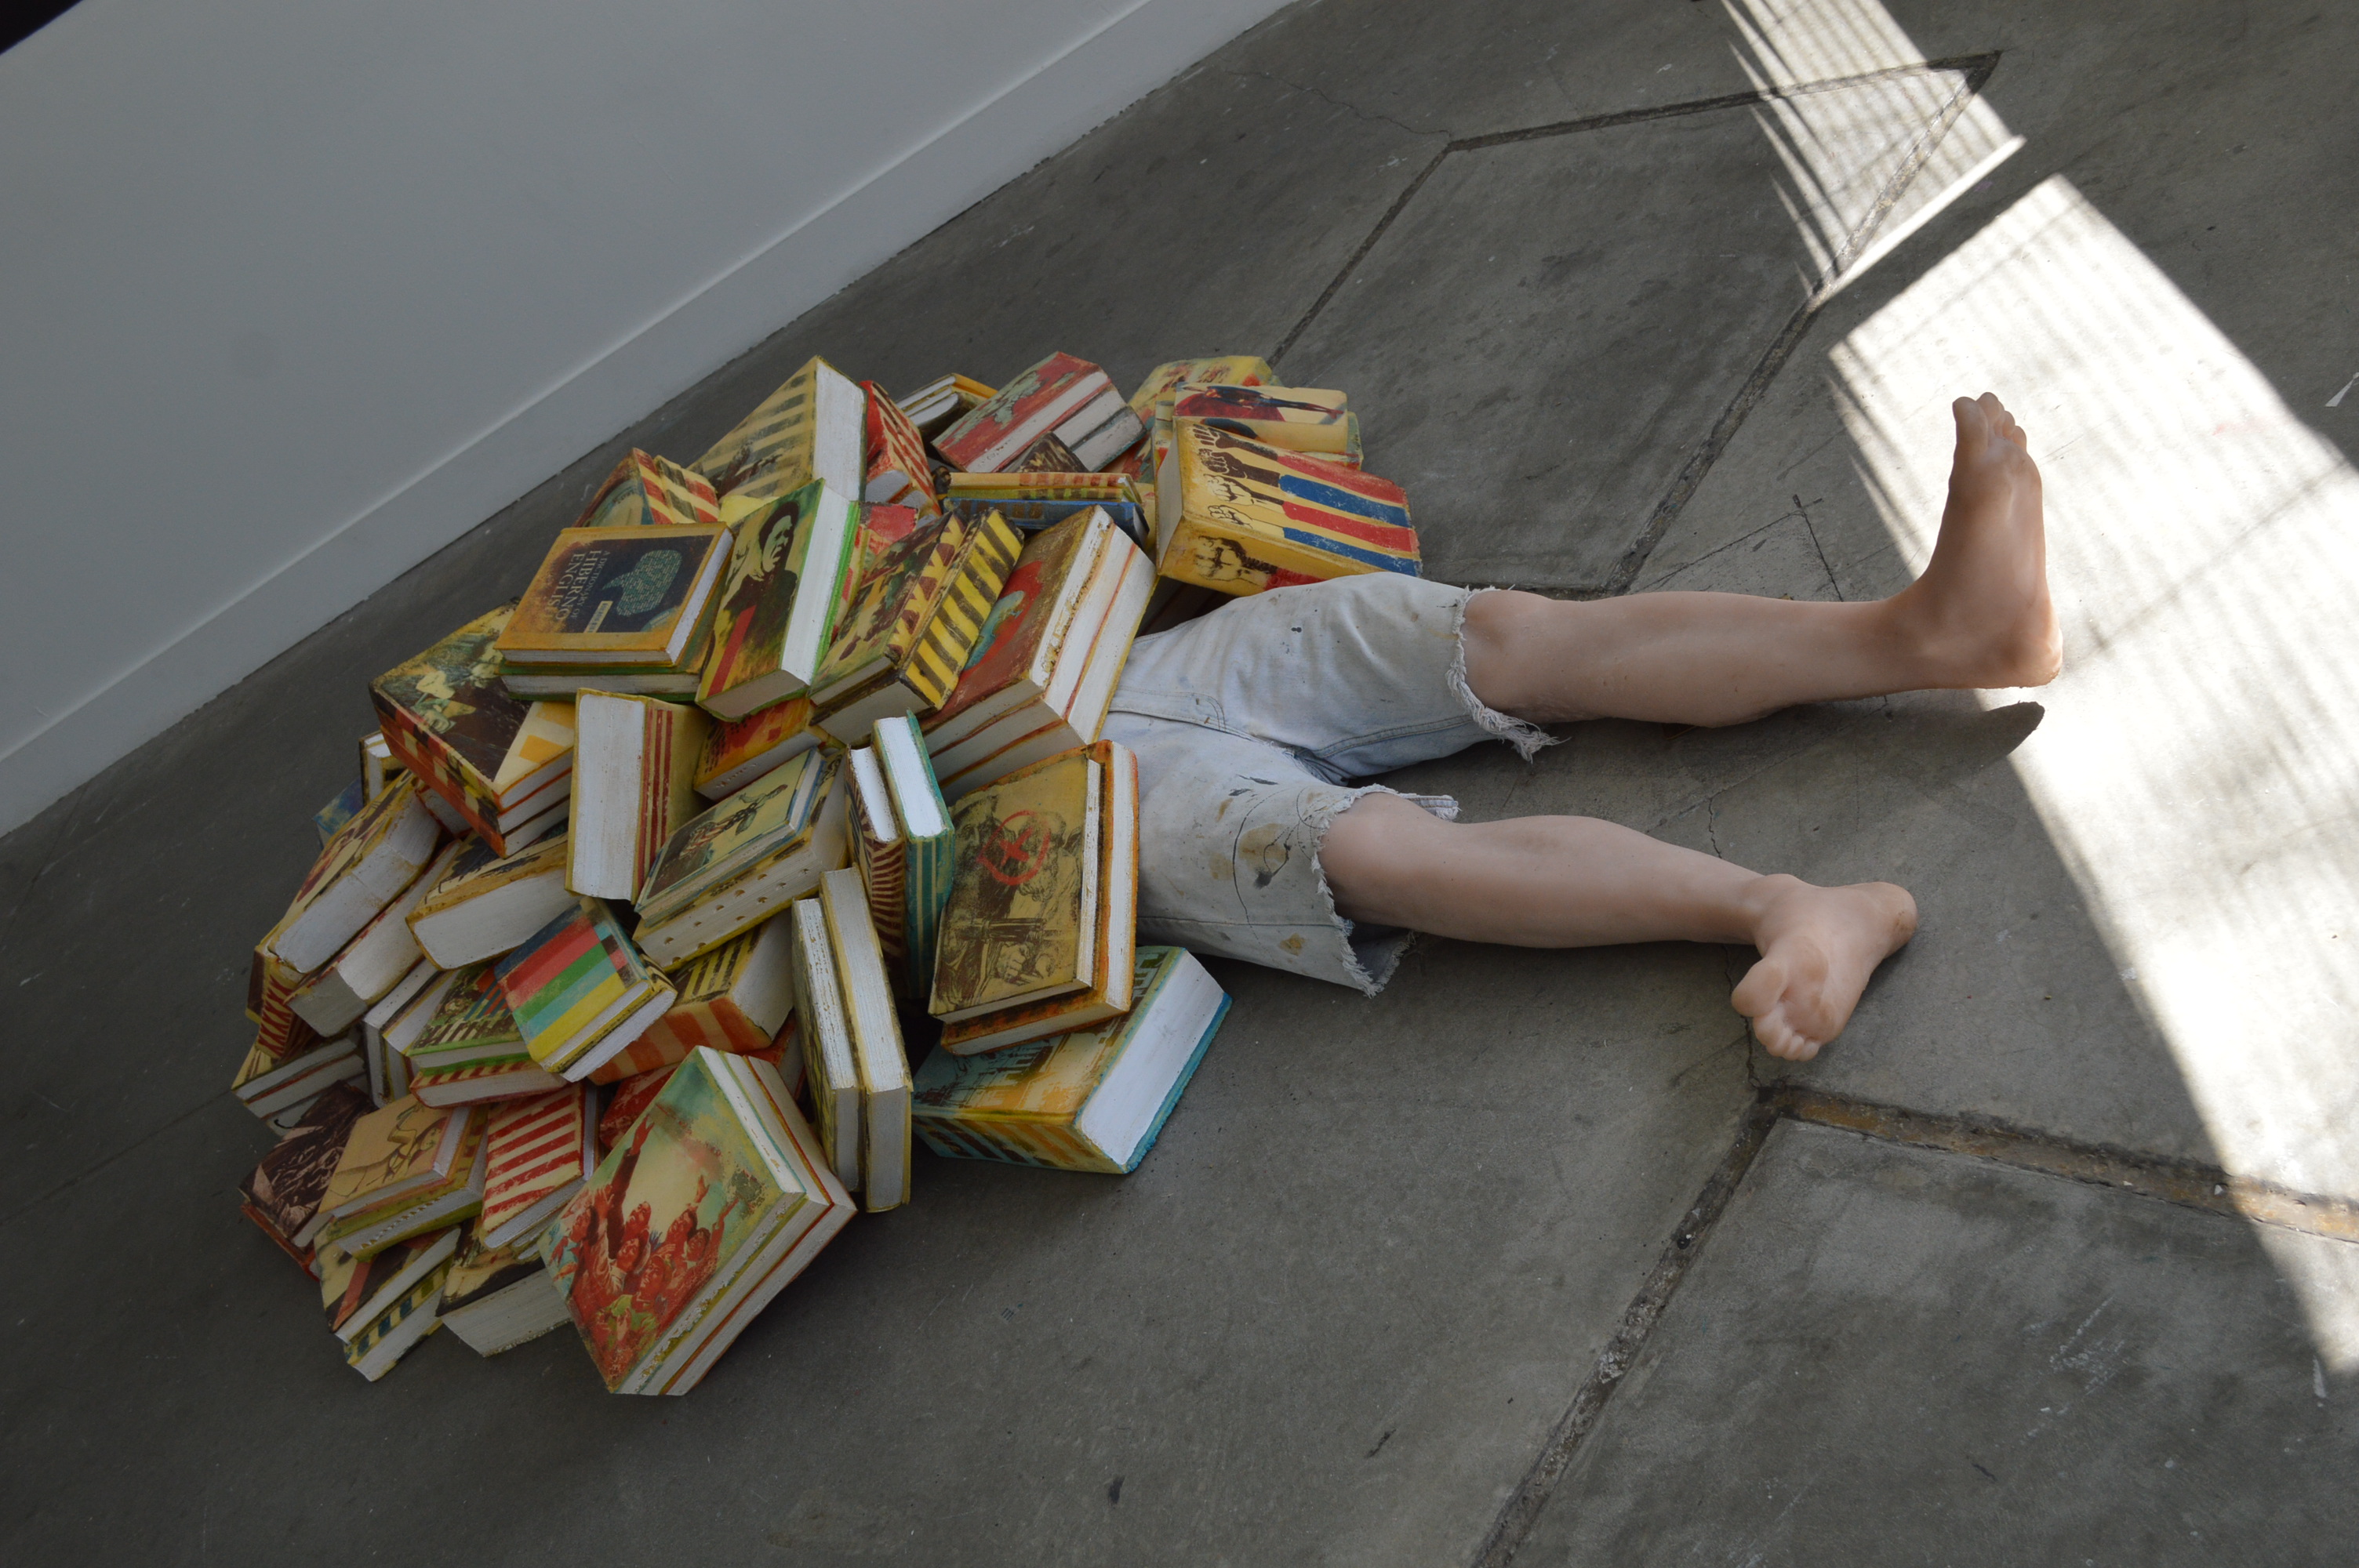 One of th features pieces at the Babble exhibit in Baltimore is "Benjamin" a fake human figure half covered by books is the work of New York artists Alina and Jeff Bliumis. (credit Anthony C. Hayes)